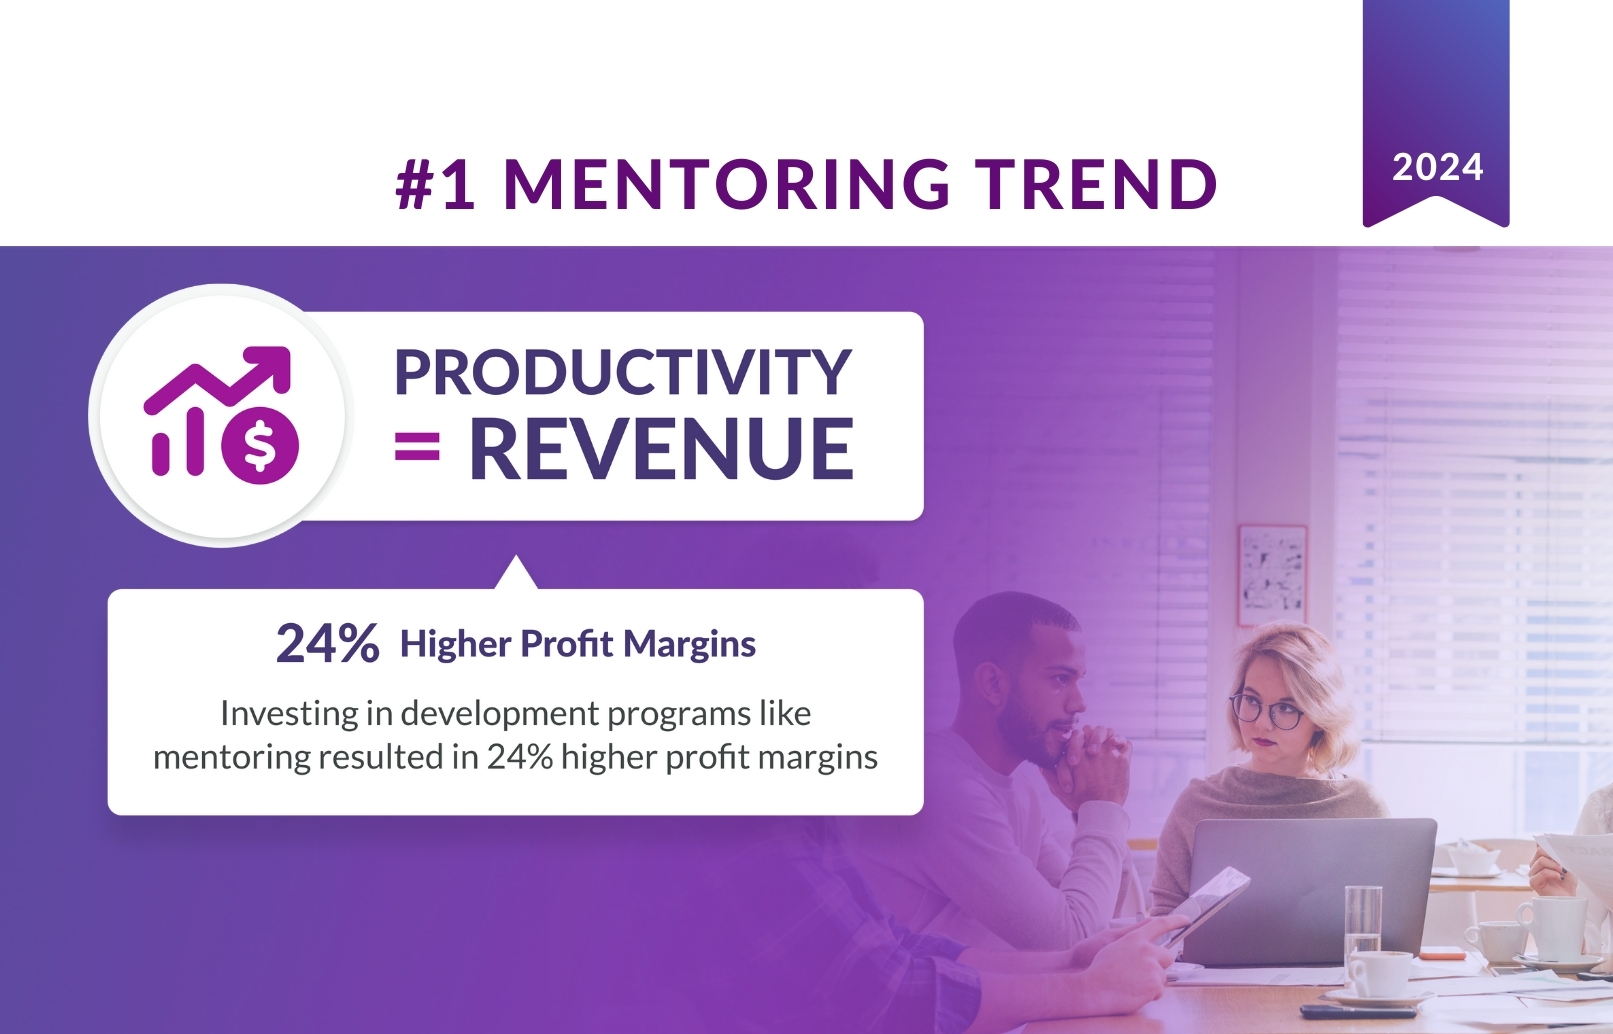 2024 Mentoring Trend: Boosting Productivity with Mentoring